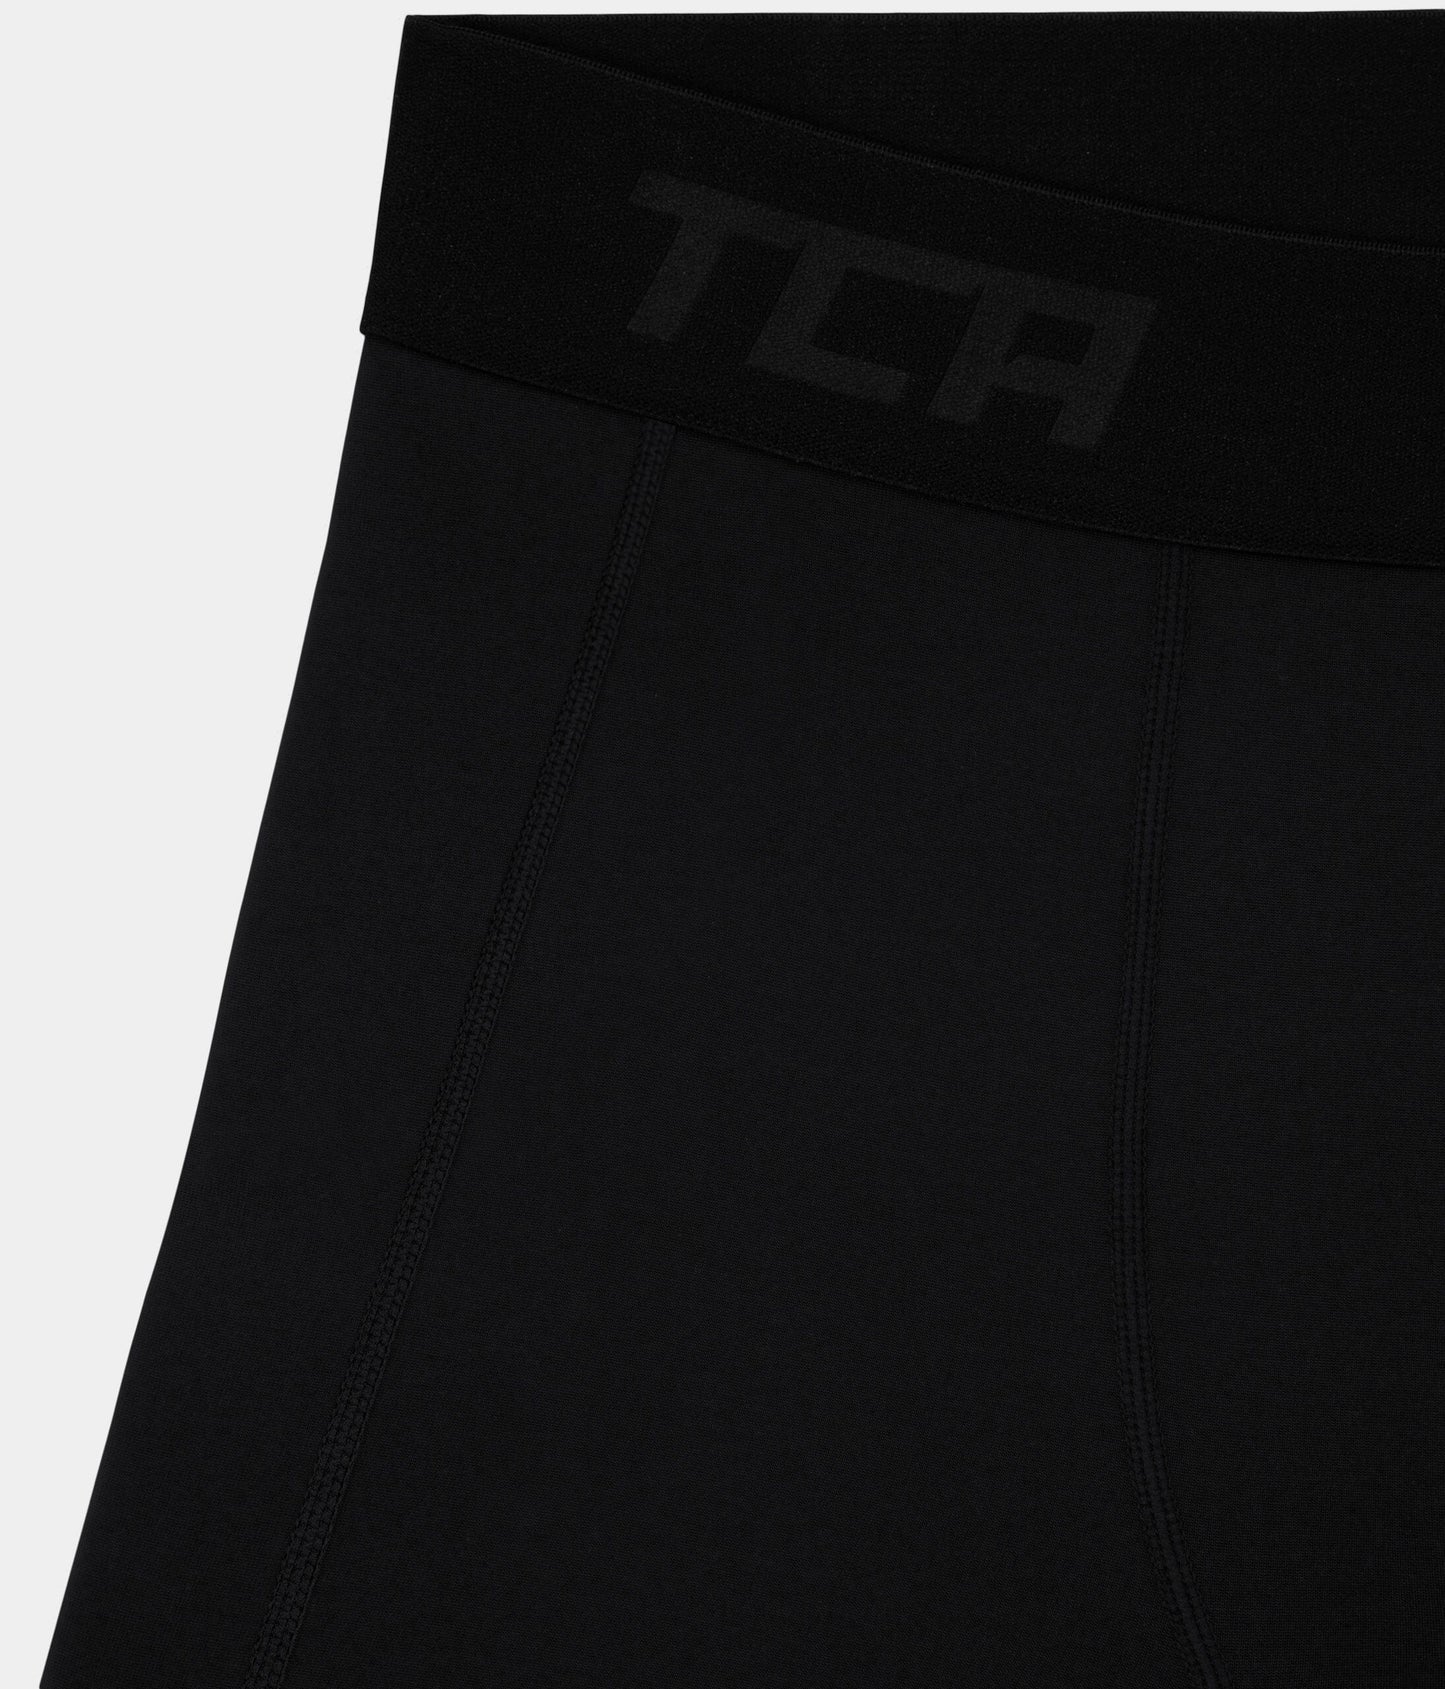 SuperThermal Compression Base Layer Shorts For Men With Brushed Inner Fabric